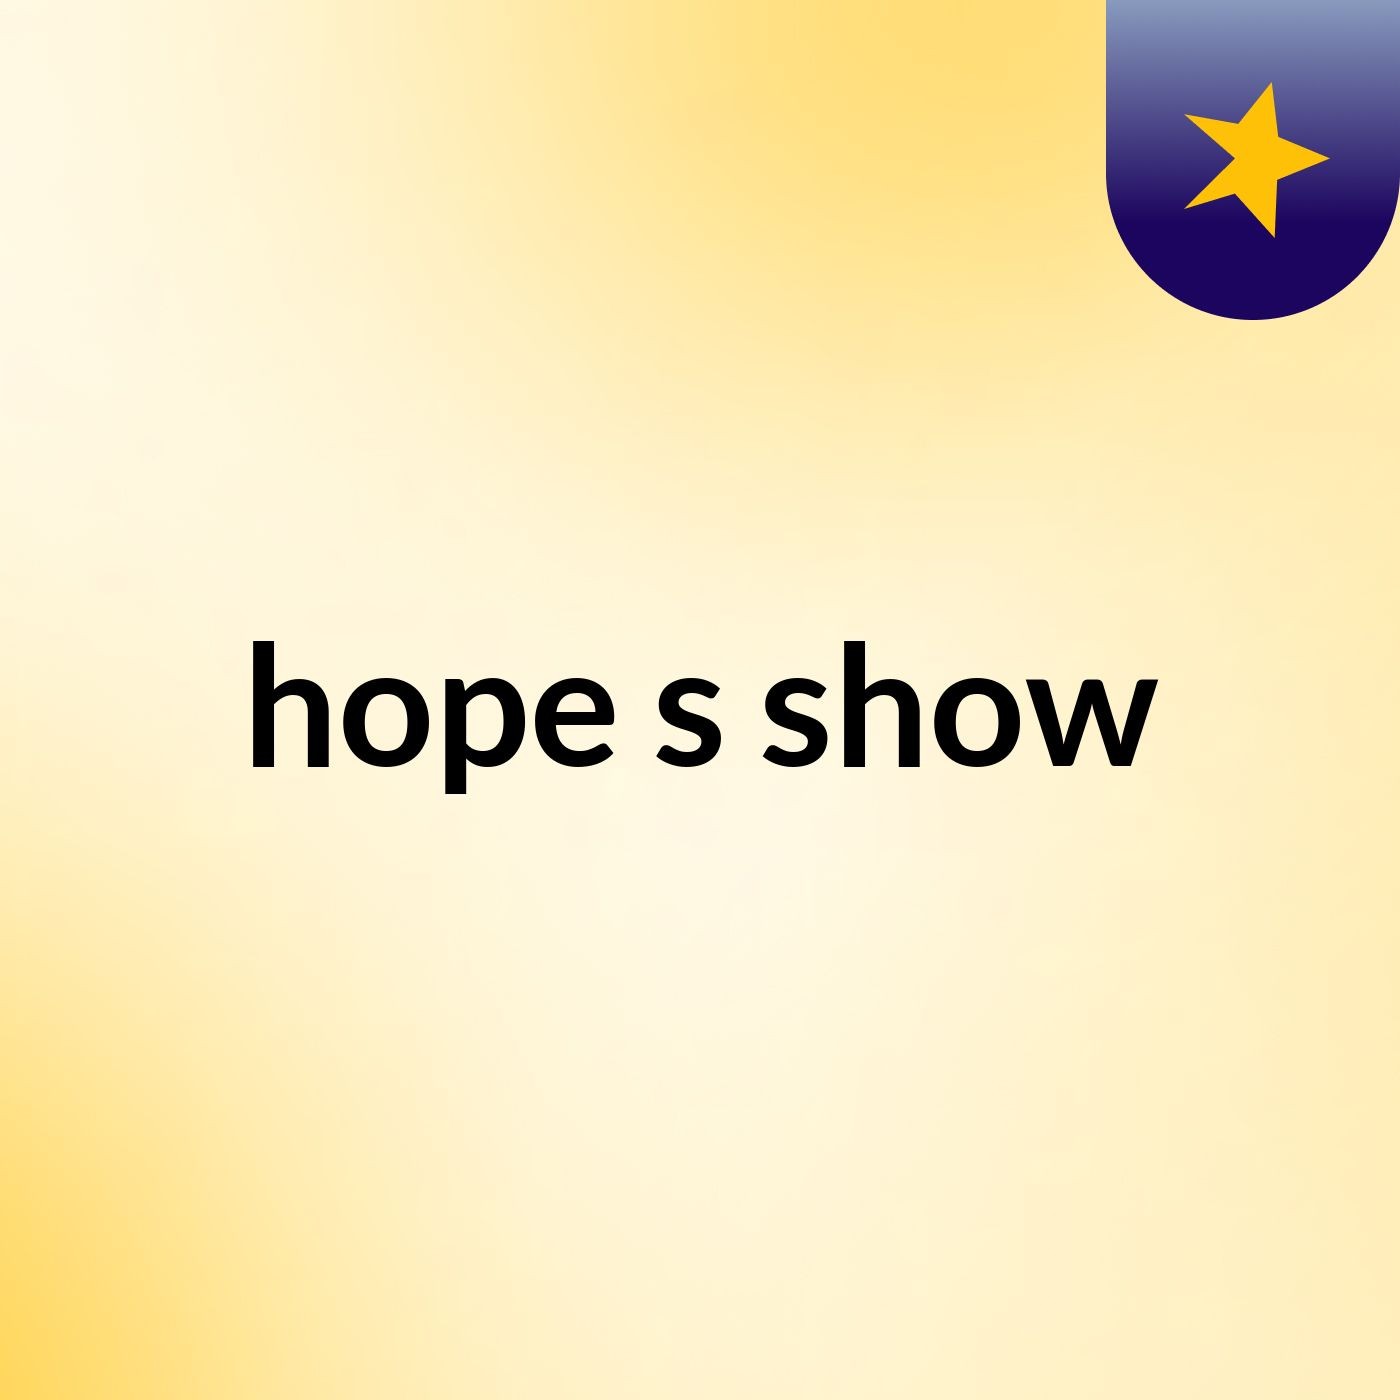 hope's show